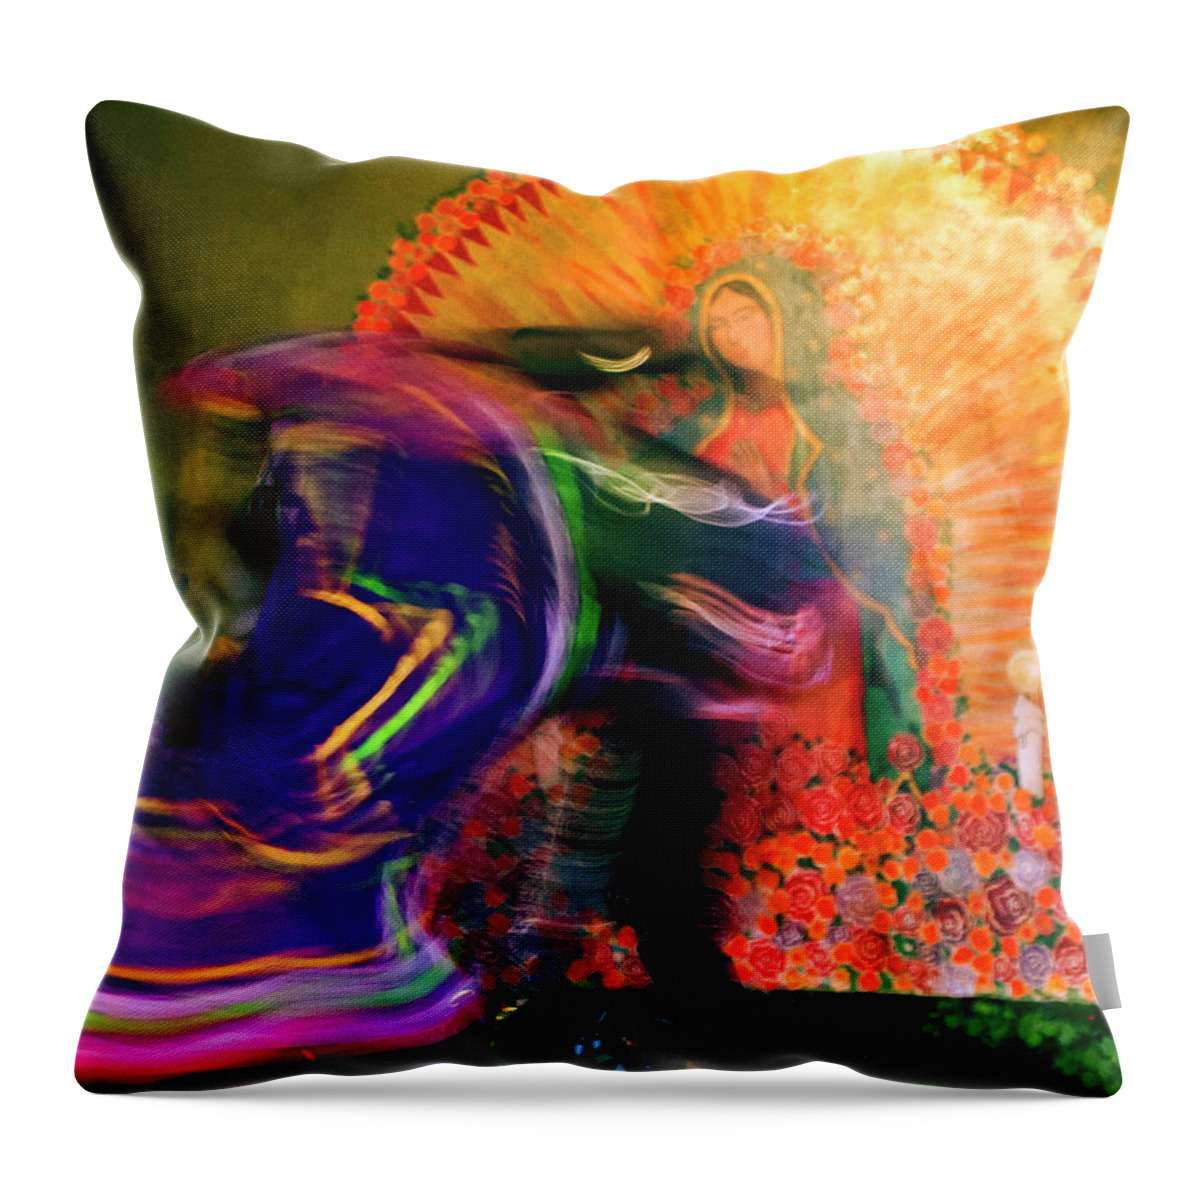 Folklorico Throw Pillow featuring the photograph Folklorico Abstract Mexican Dancers by Gigi Ebert